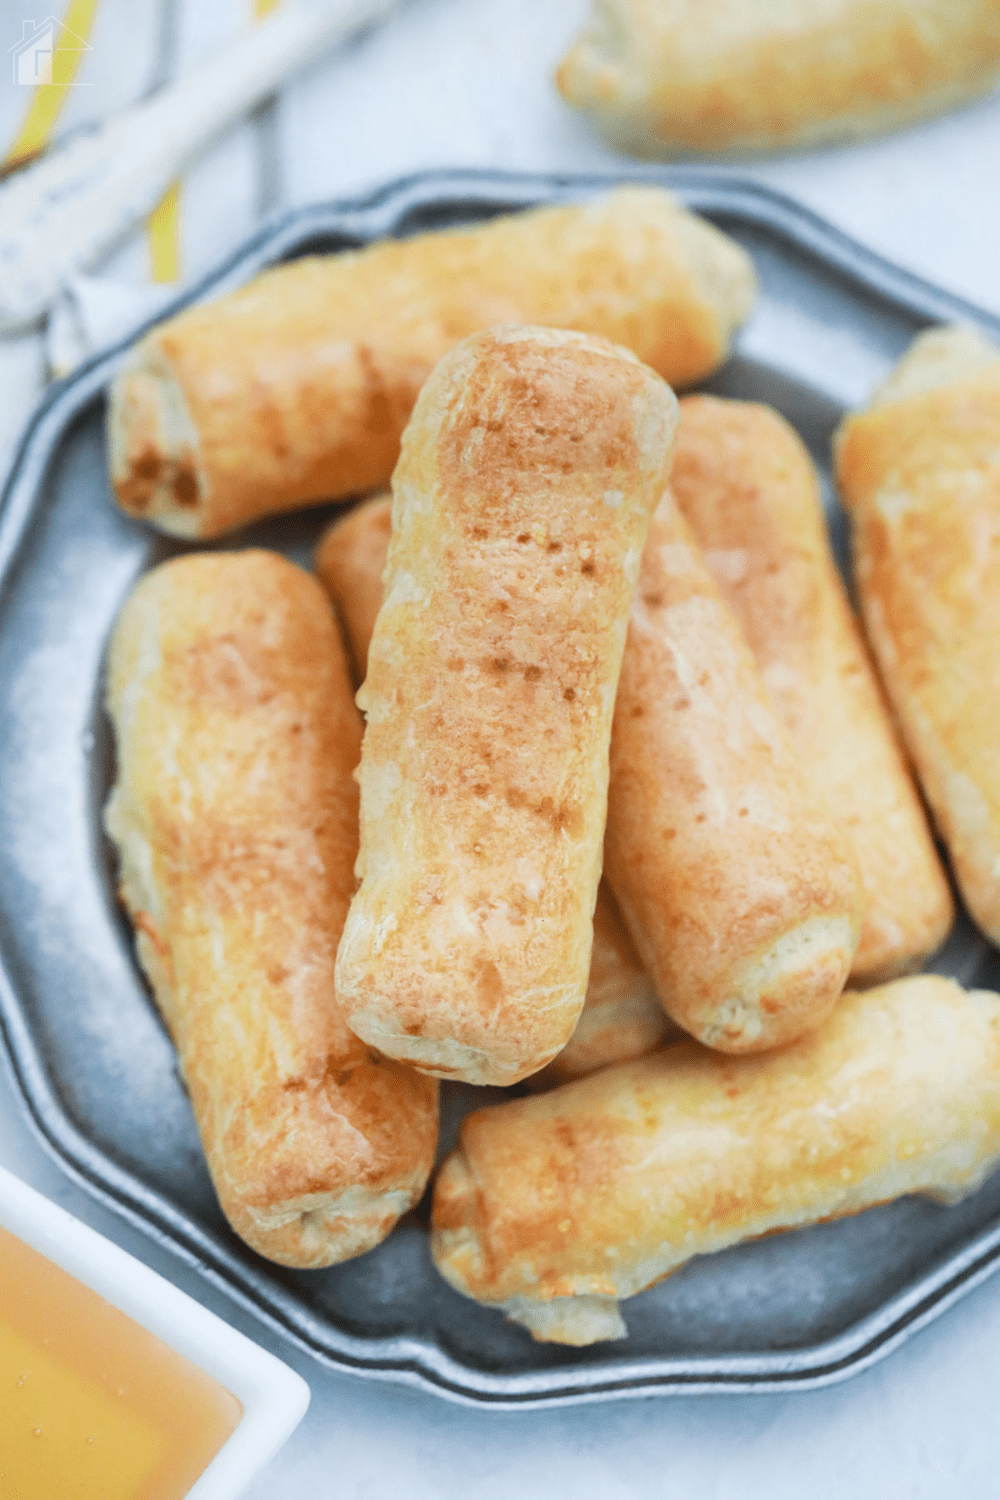 Looking for a delicious Puerto Rican dessert? These delicious quesitos are easy to make cheese pastries that are popular in Puerto Rico. via @mystayathome